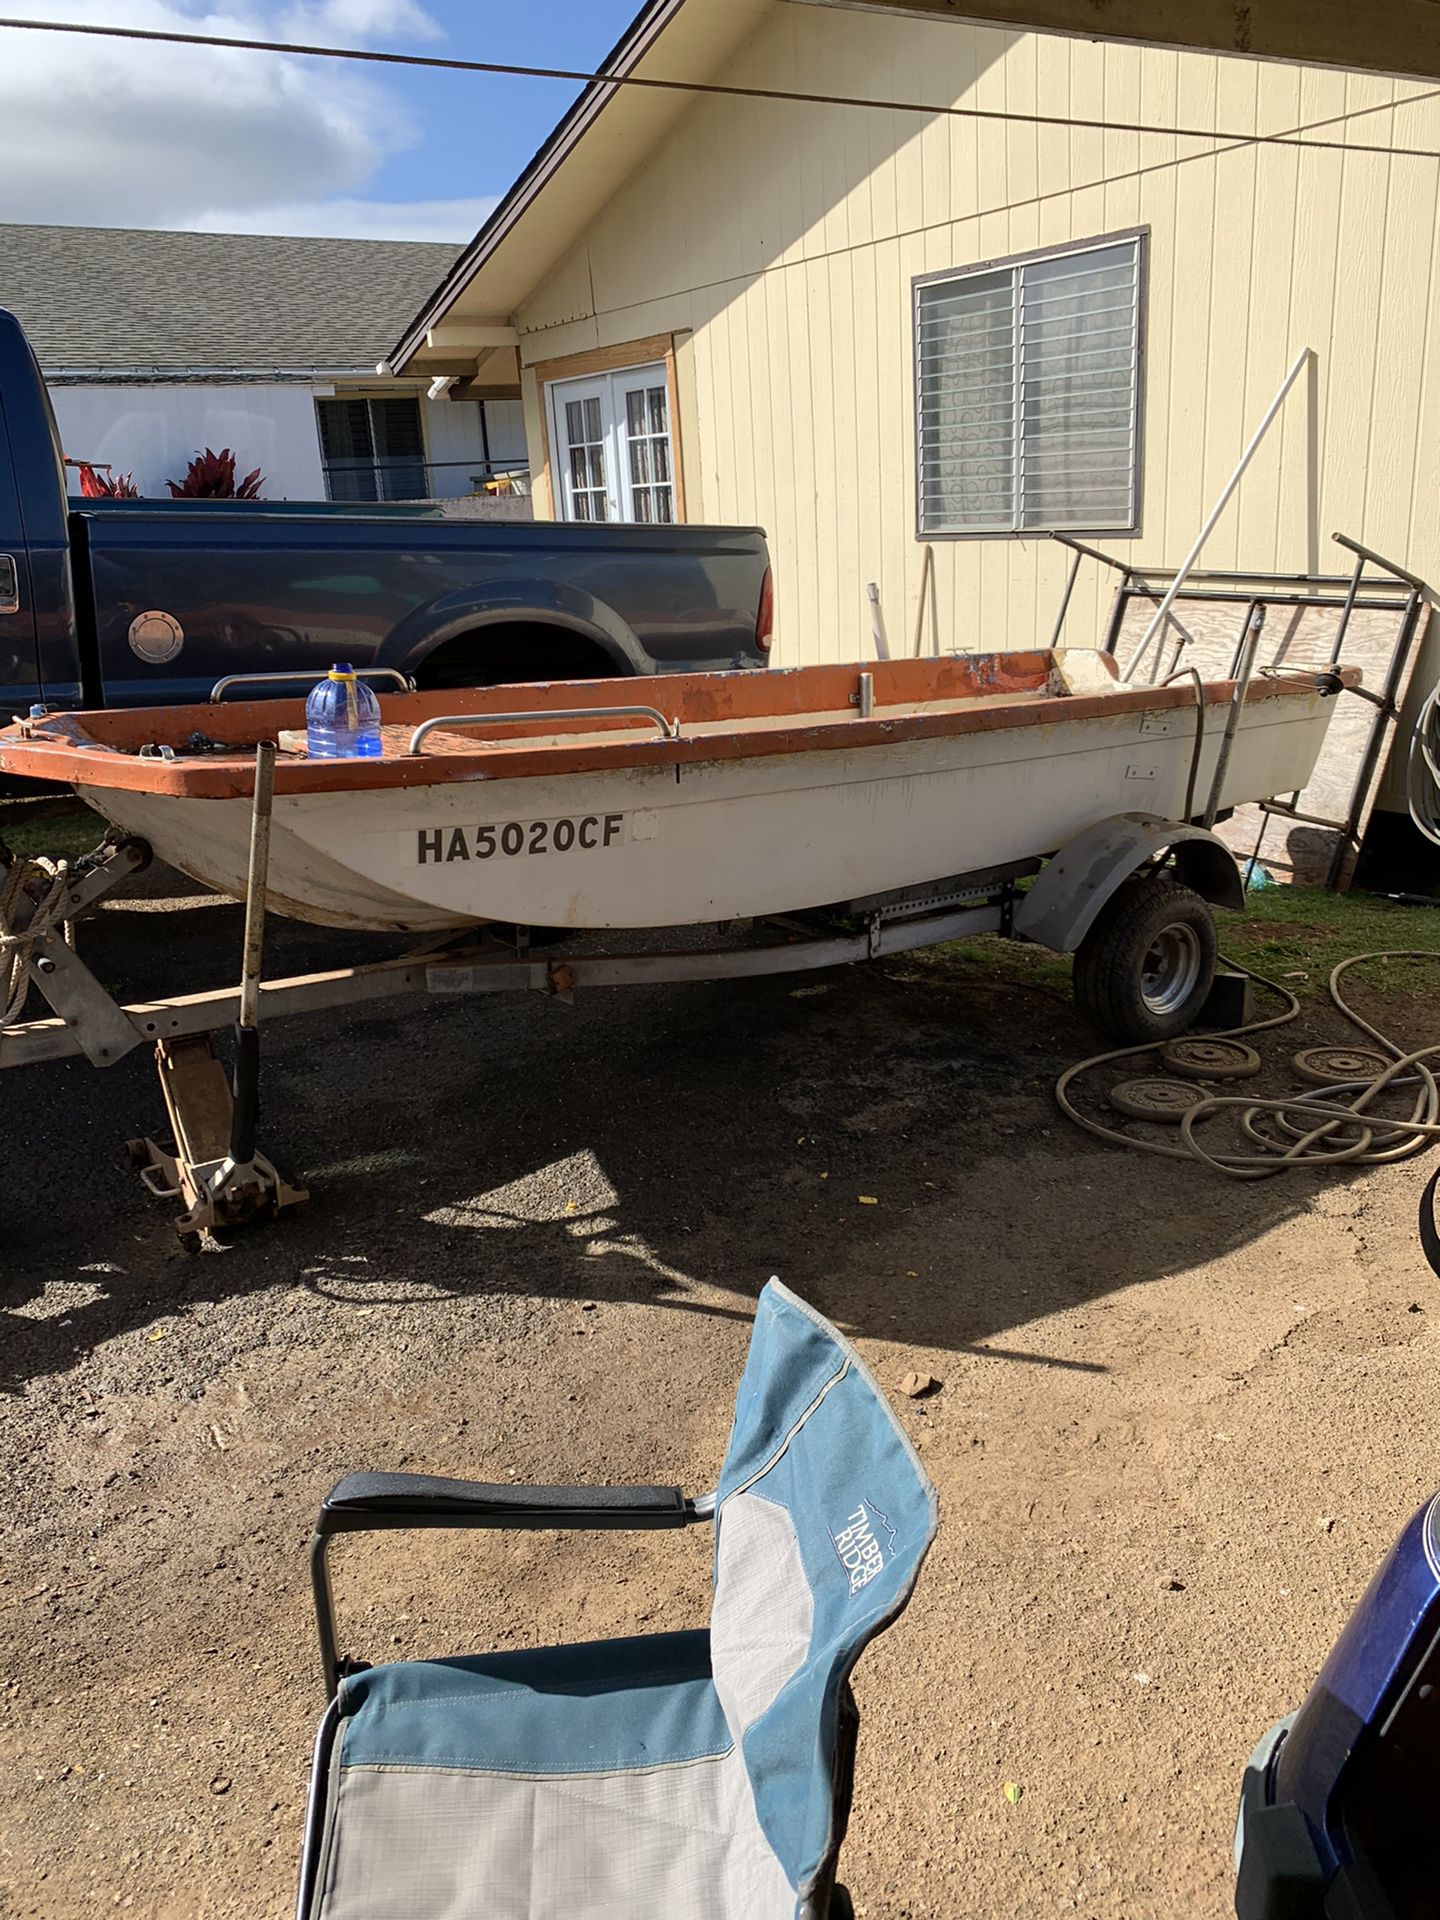 14ft game fisher for sale or trade. Just gotta throw a kicker on it and you ready to fish or dive. Willing to trade for quad dirt bike or golf carts